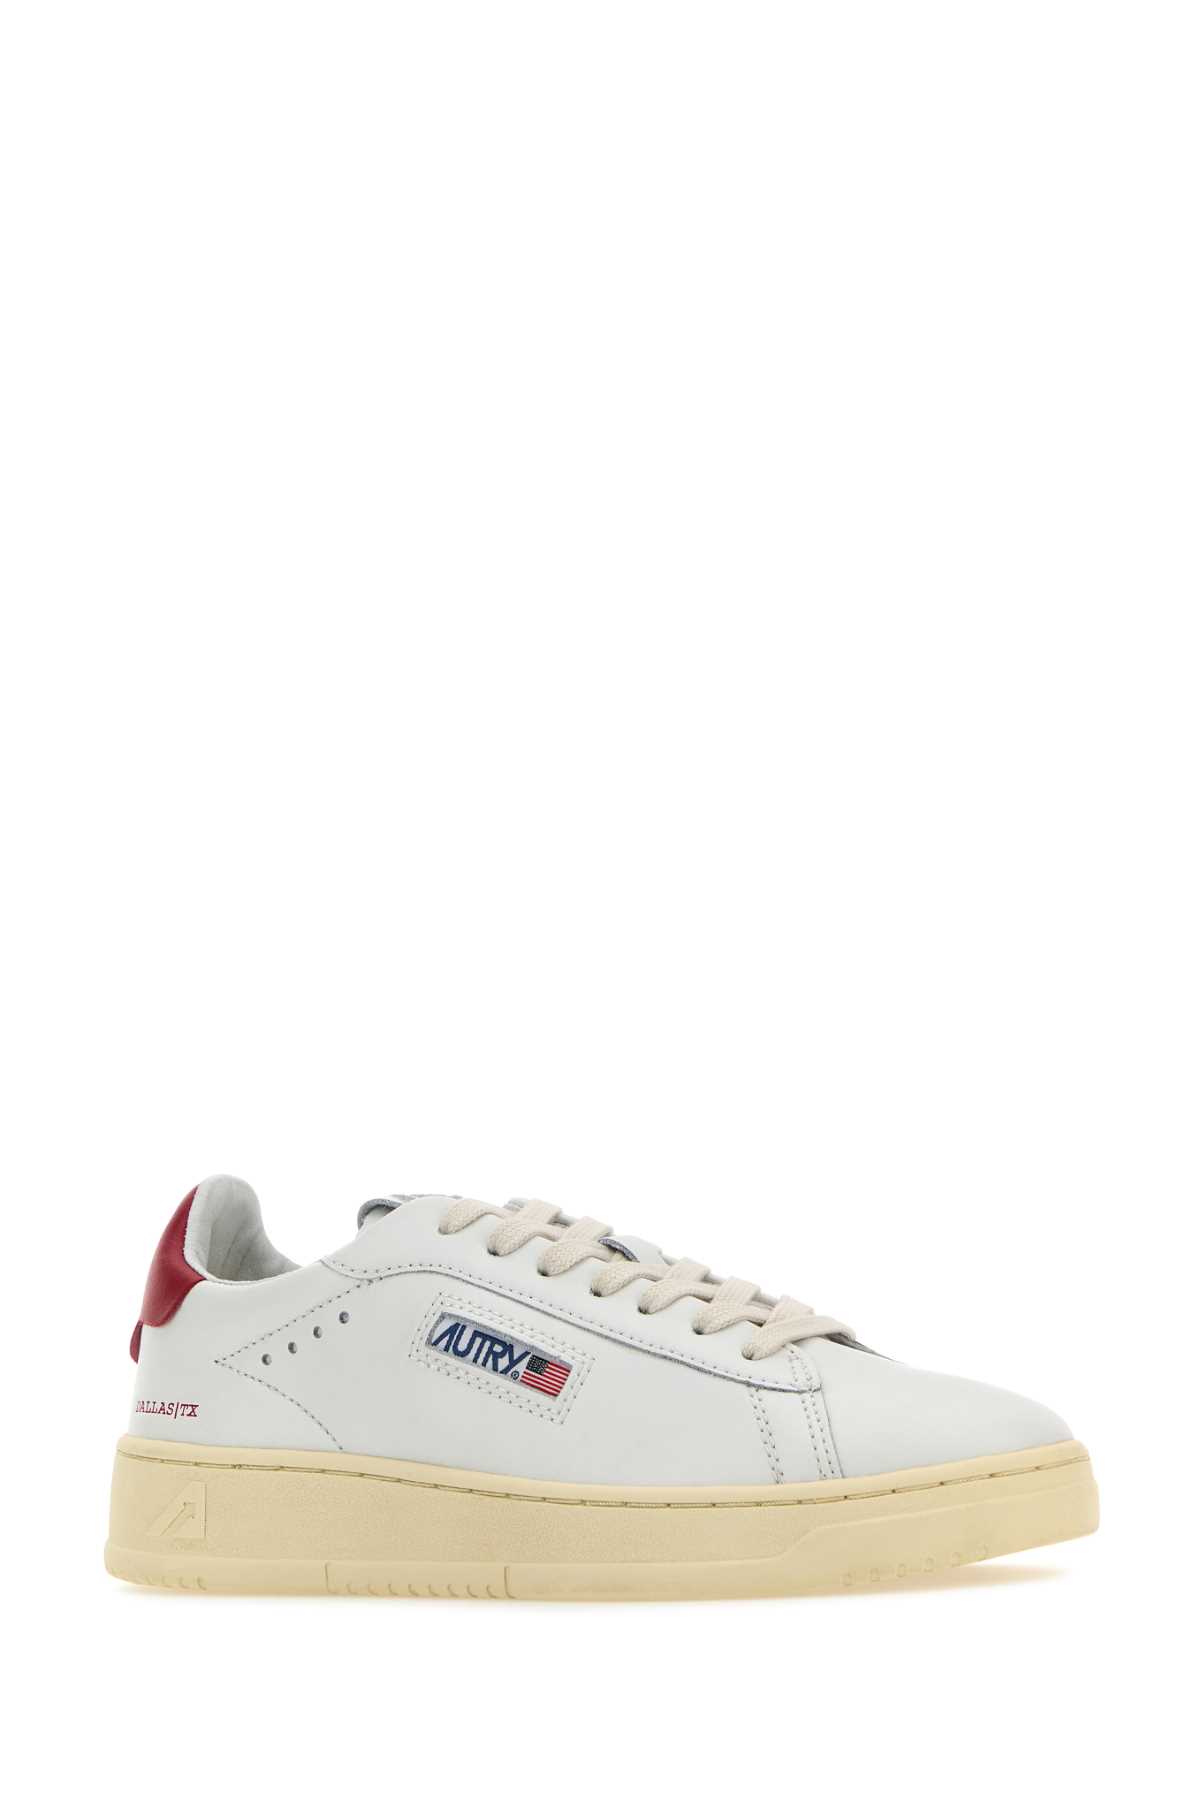 Shop Autry White Leather Dallas Sneakers In Nw03